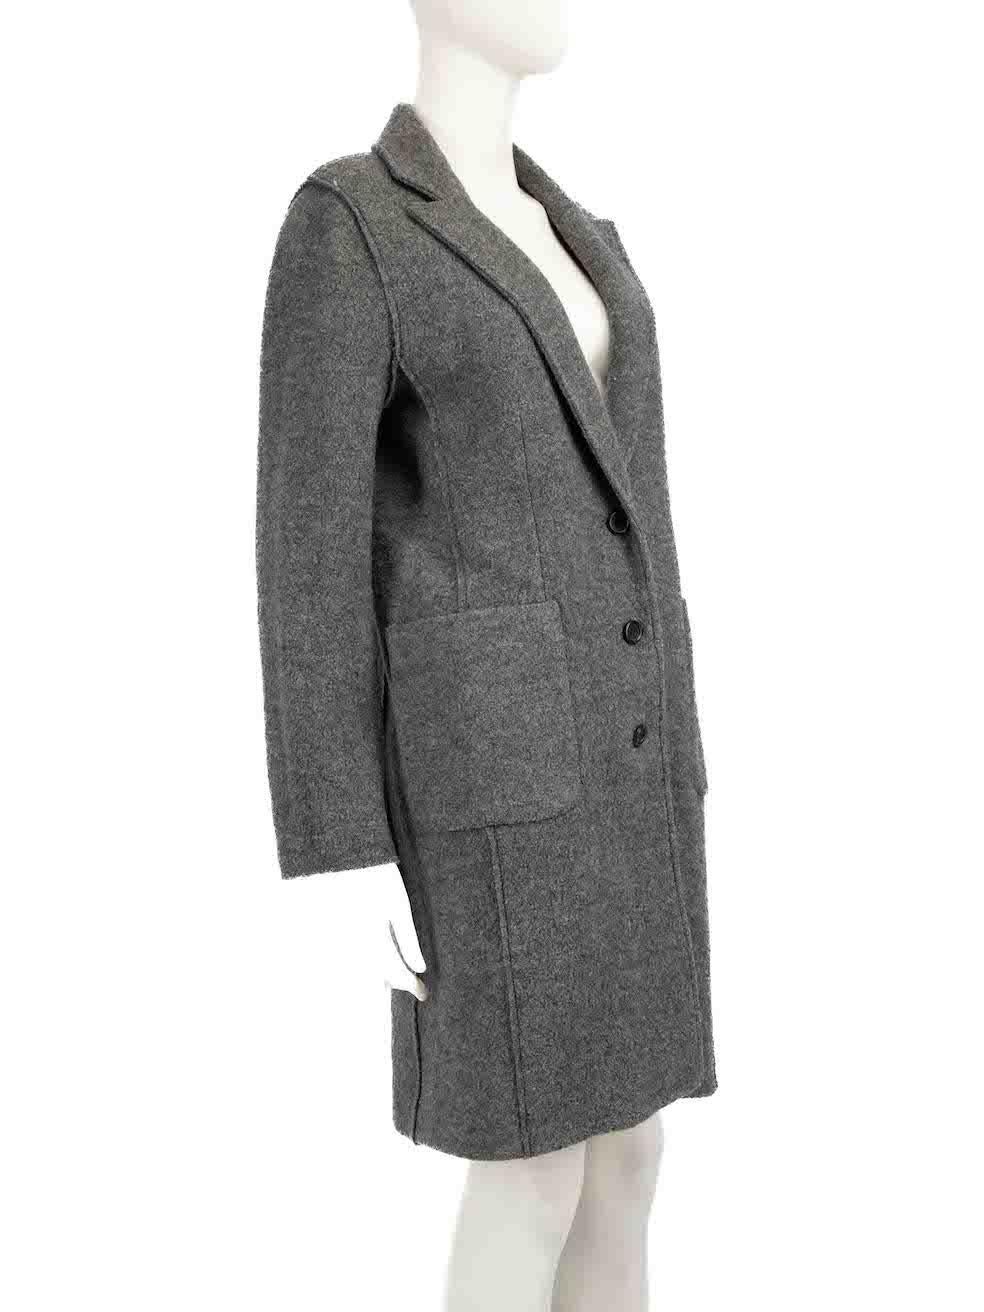 CONDITION is Very good. Hardly any visible wear to coat is evident on this used J.Crew designer resale item.
 
 
 
 Details
 
 
 Grey
 
 Wool
 
 Coat
 
 Single breasted
 
 Button up fastening
 
 2x Front pockets
 
 
 
 
 
 Made in China
 
 
 
